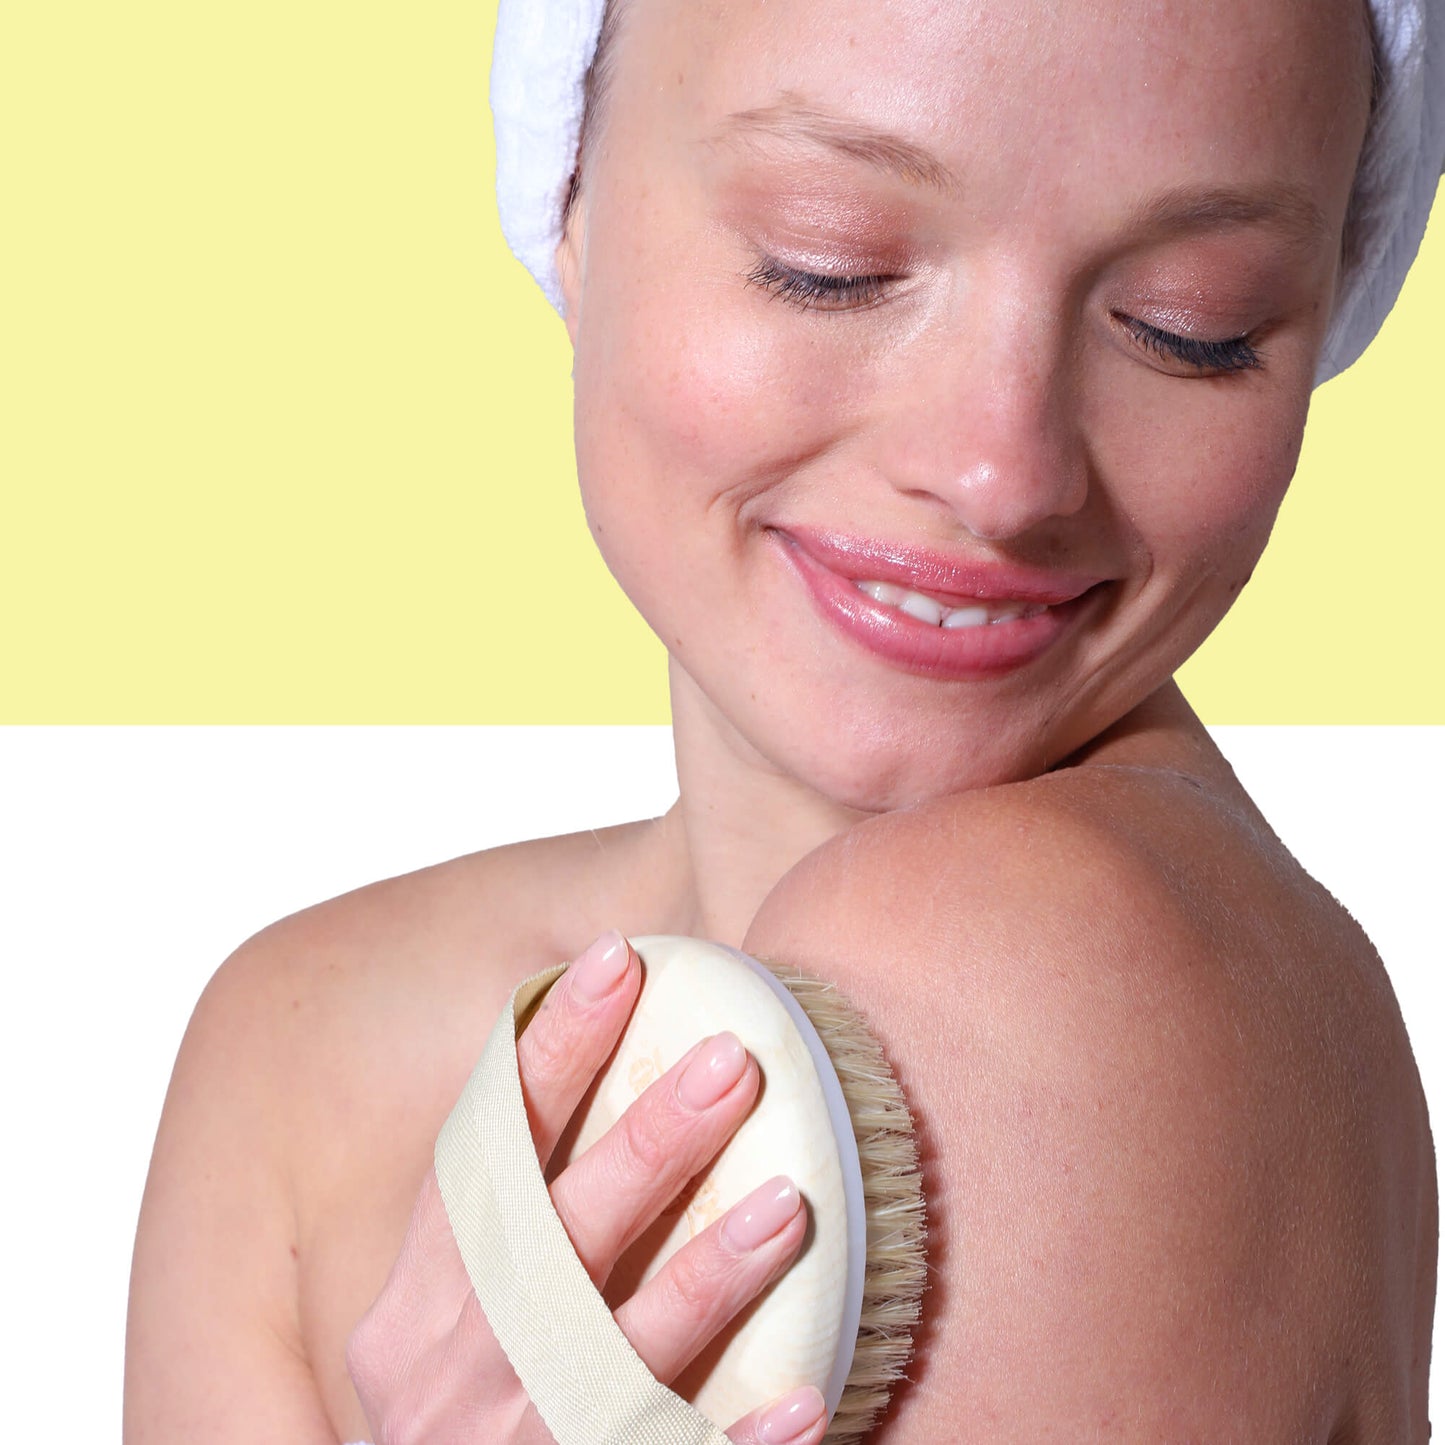 Afterspa Detox Massage Brush | To Dry Brush And Exfoliate The Body.